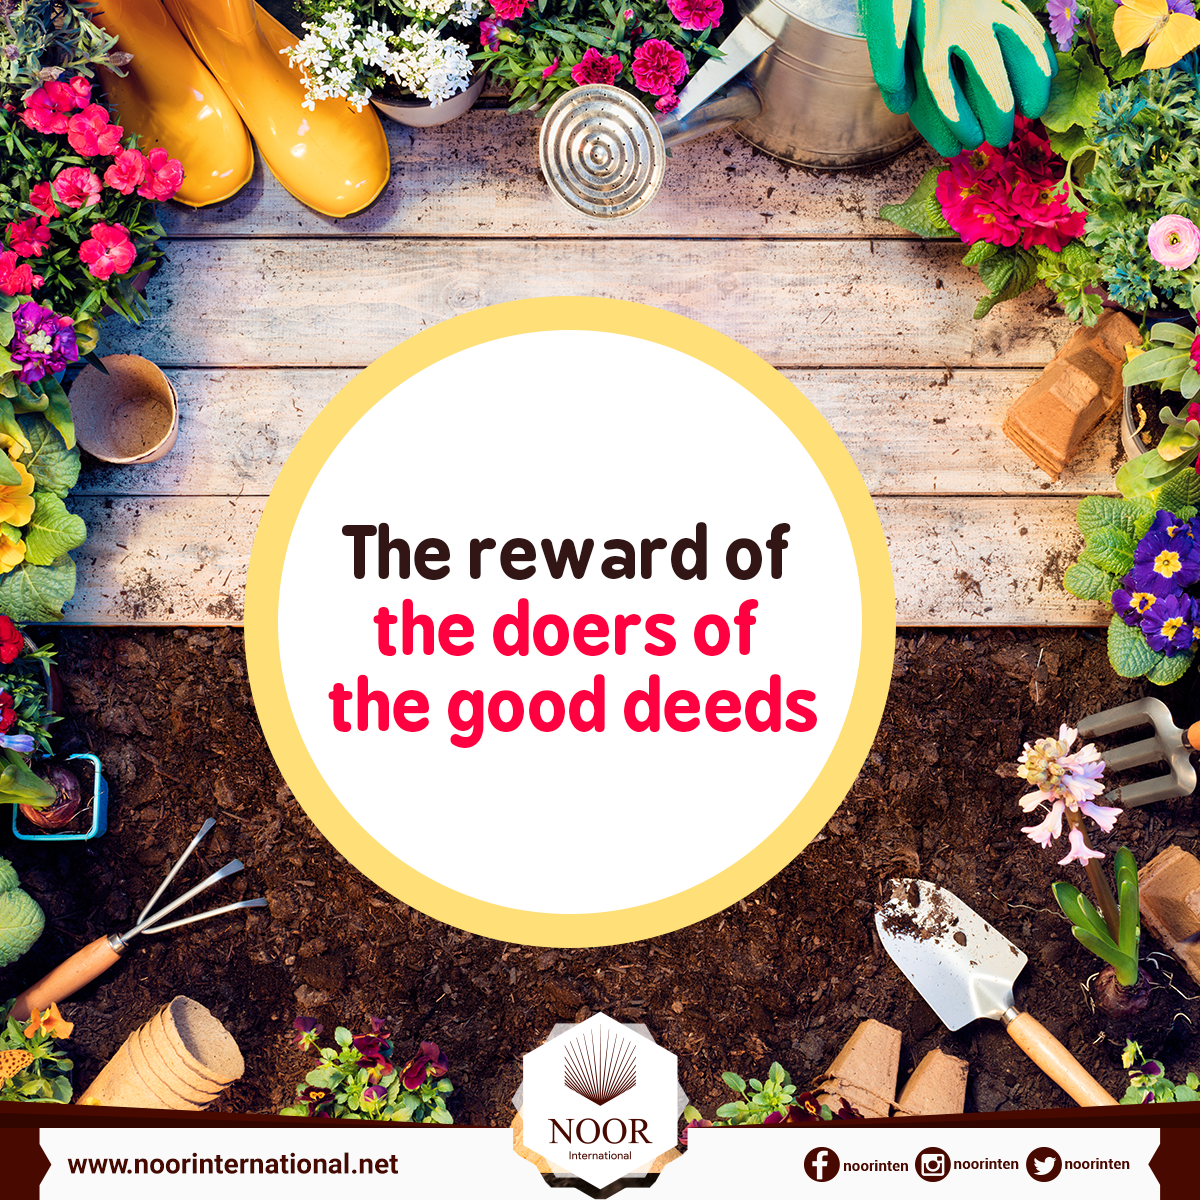 The reward of the doers of the good deeds